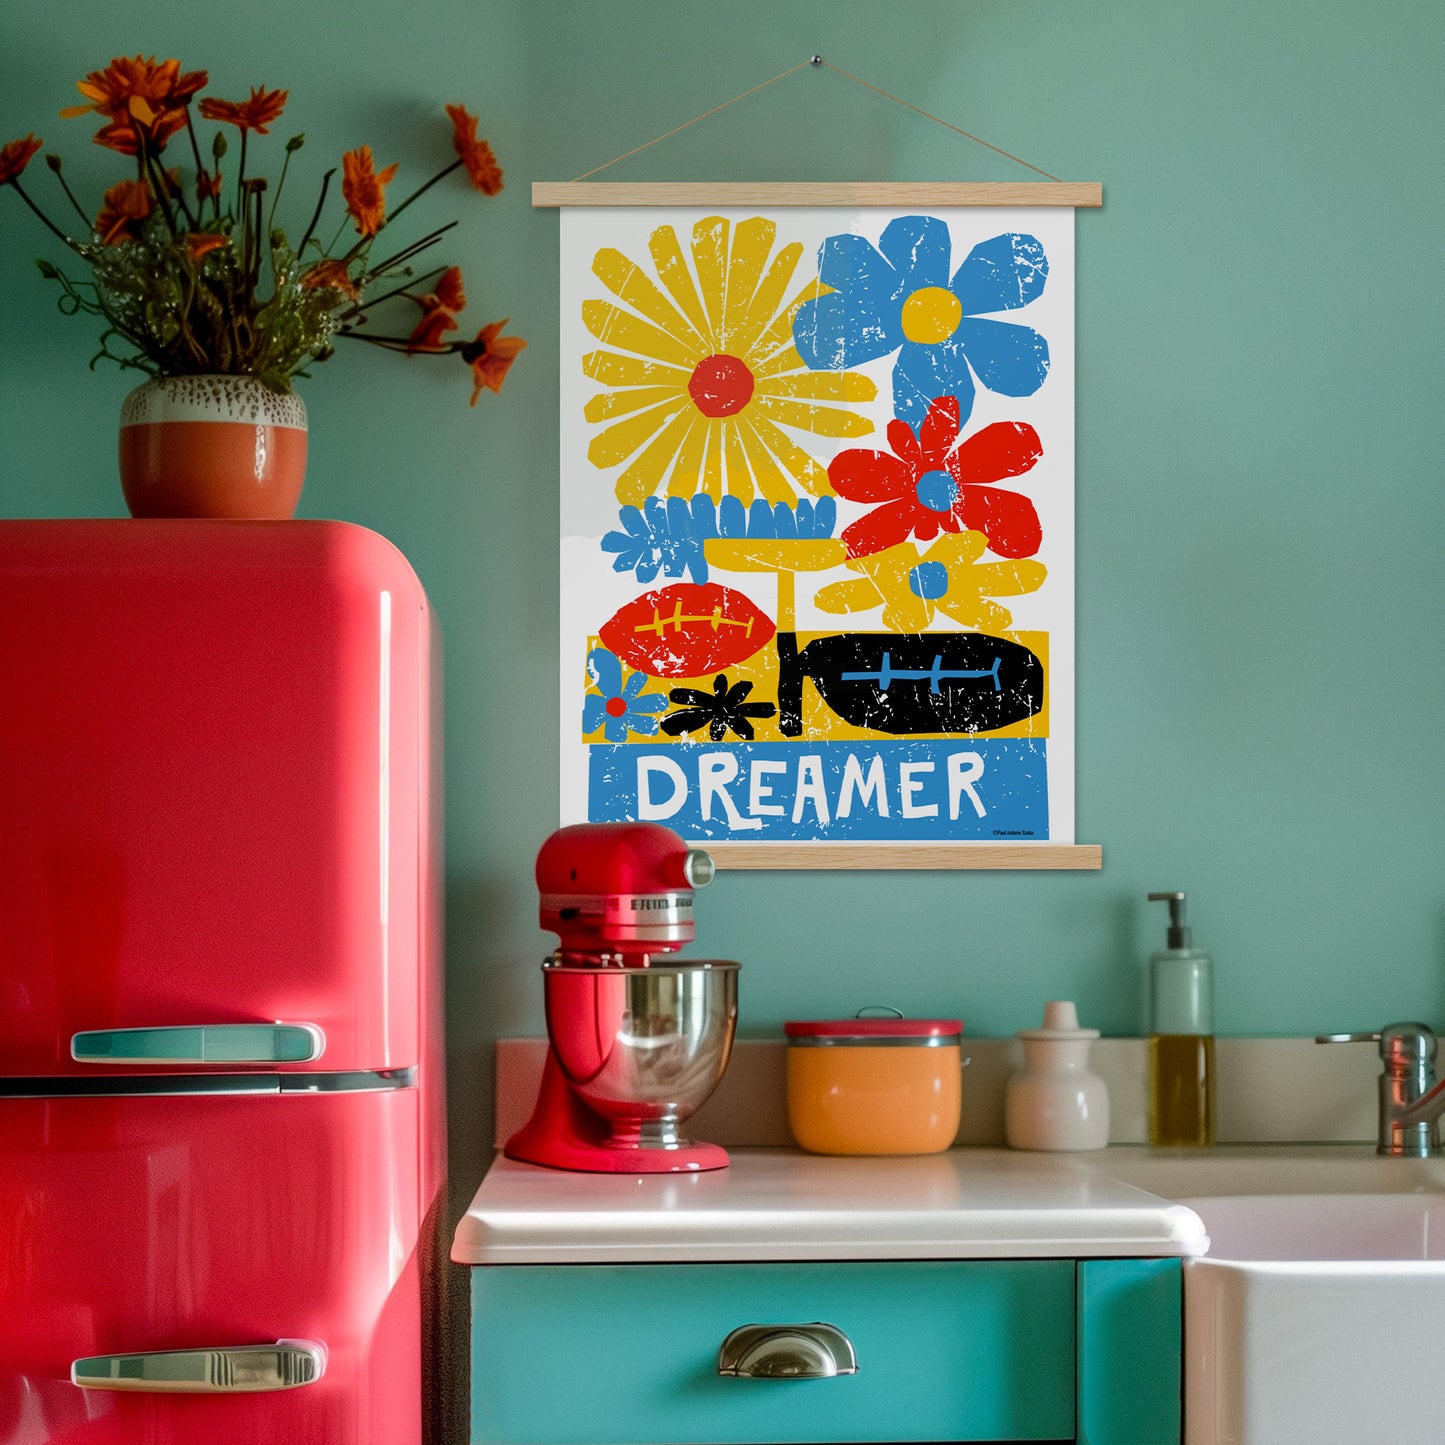 Dreamer Large Wall Hanging Poster by United Day Dreamers